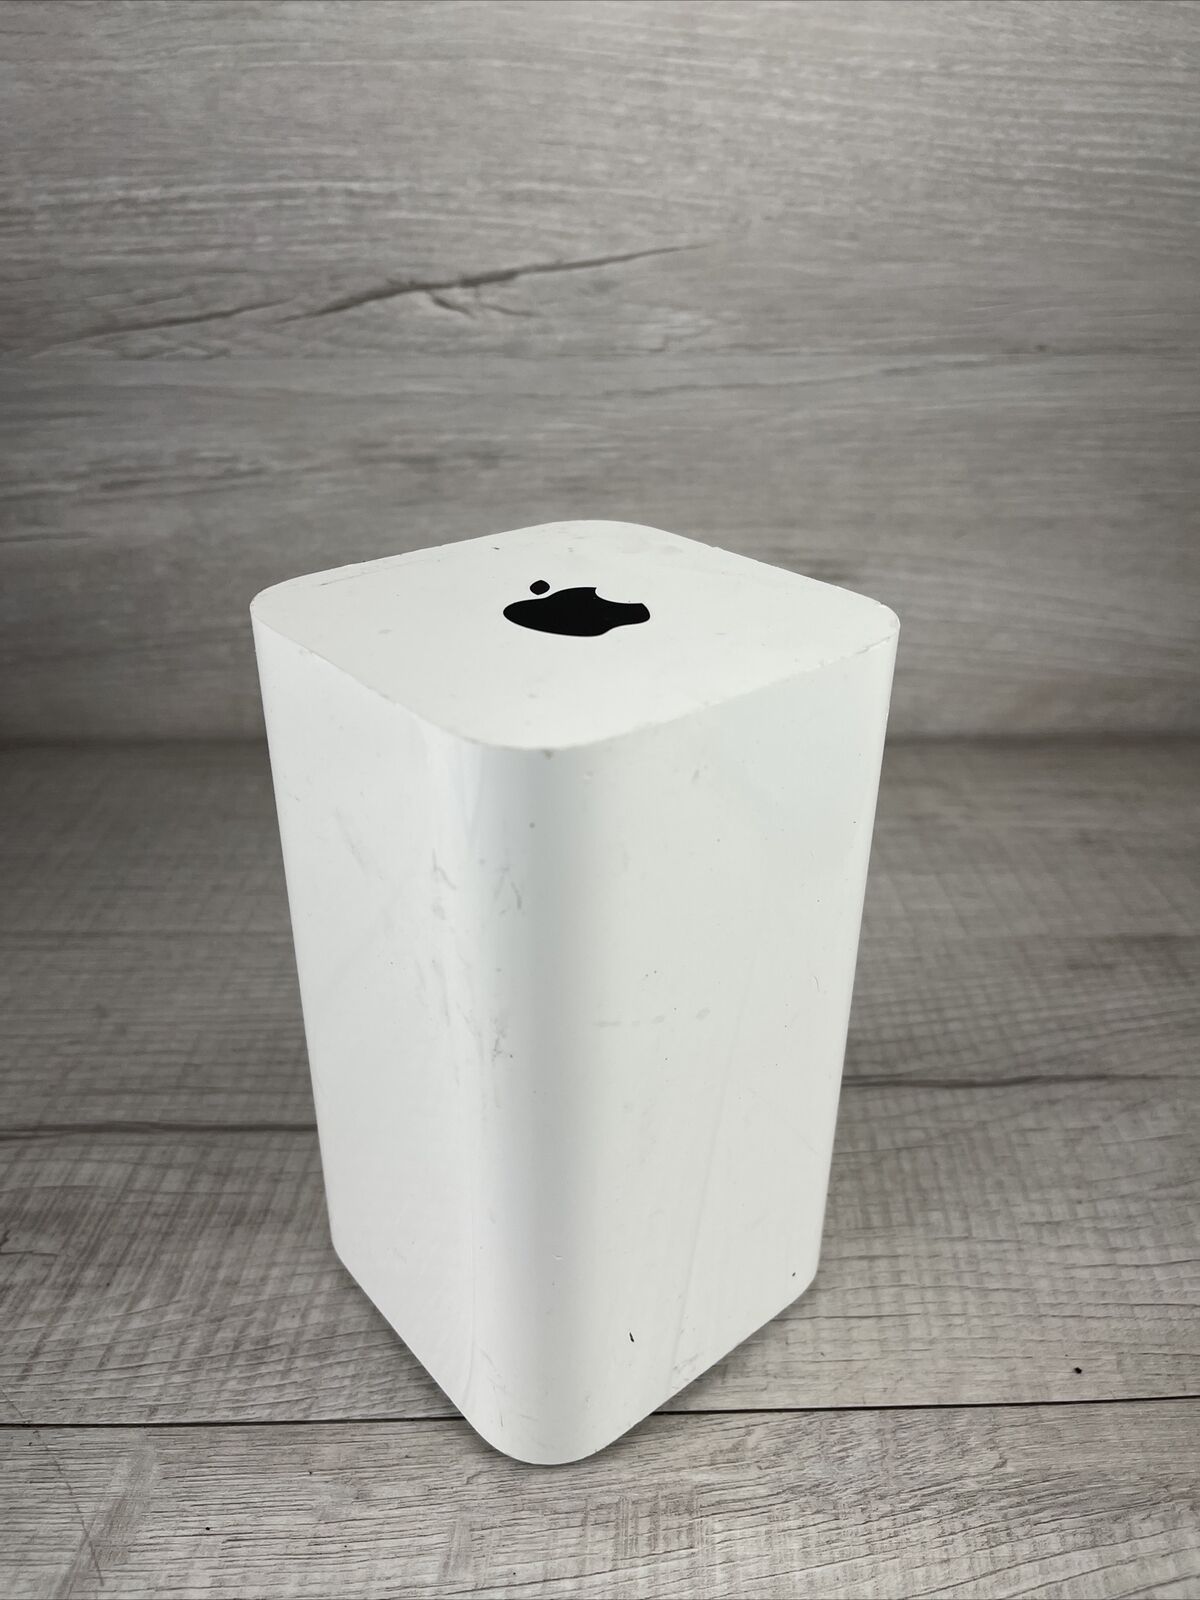 Apple AirPort Extreme 6th 802.11ac Wireless Router 3 Gigabit 1 USB A1521